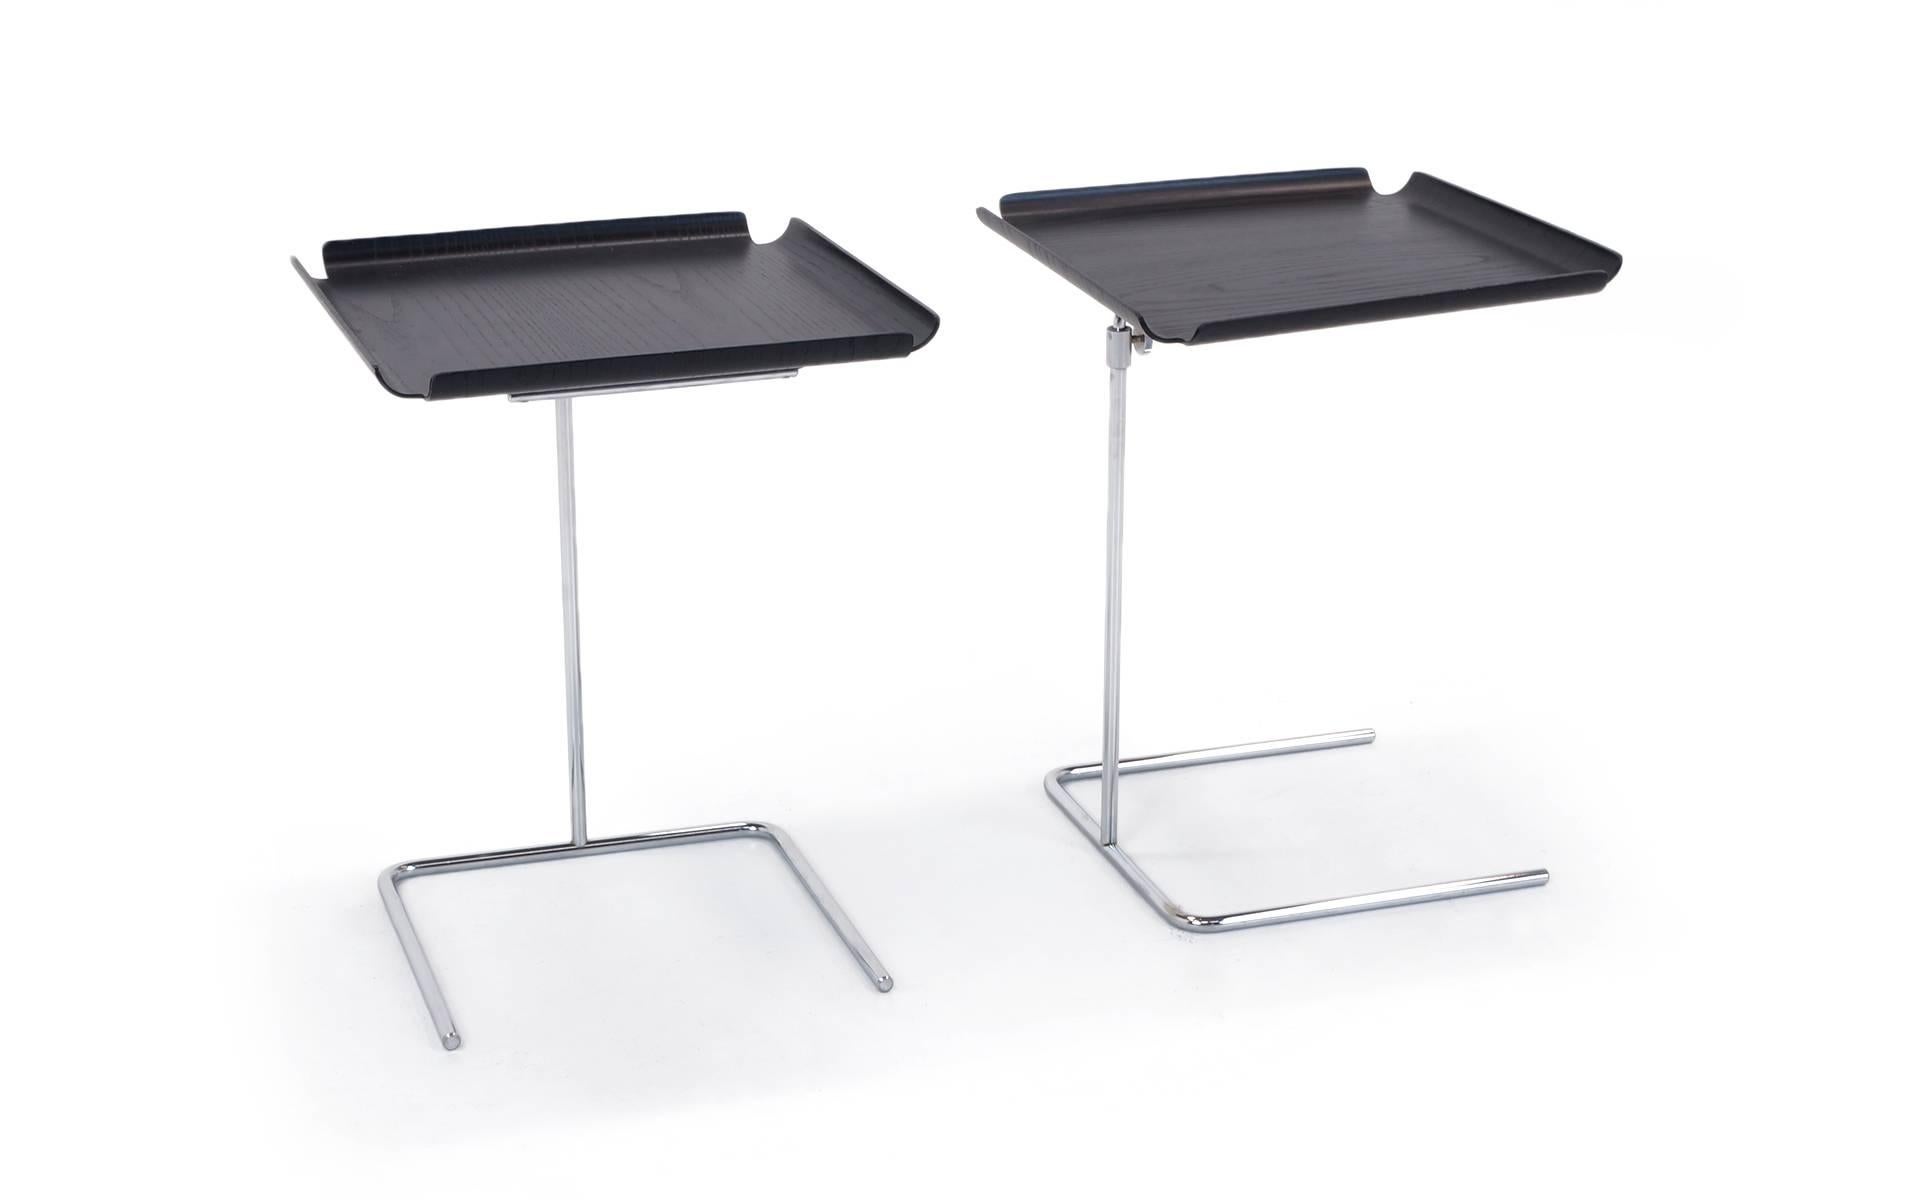 Pair of near mint condition George Nelson tray tables. Early Herman Miller reissue. Not the current Vitra production. Collapsed height is 19 in. Extended height is 33.5 in.